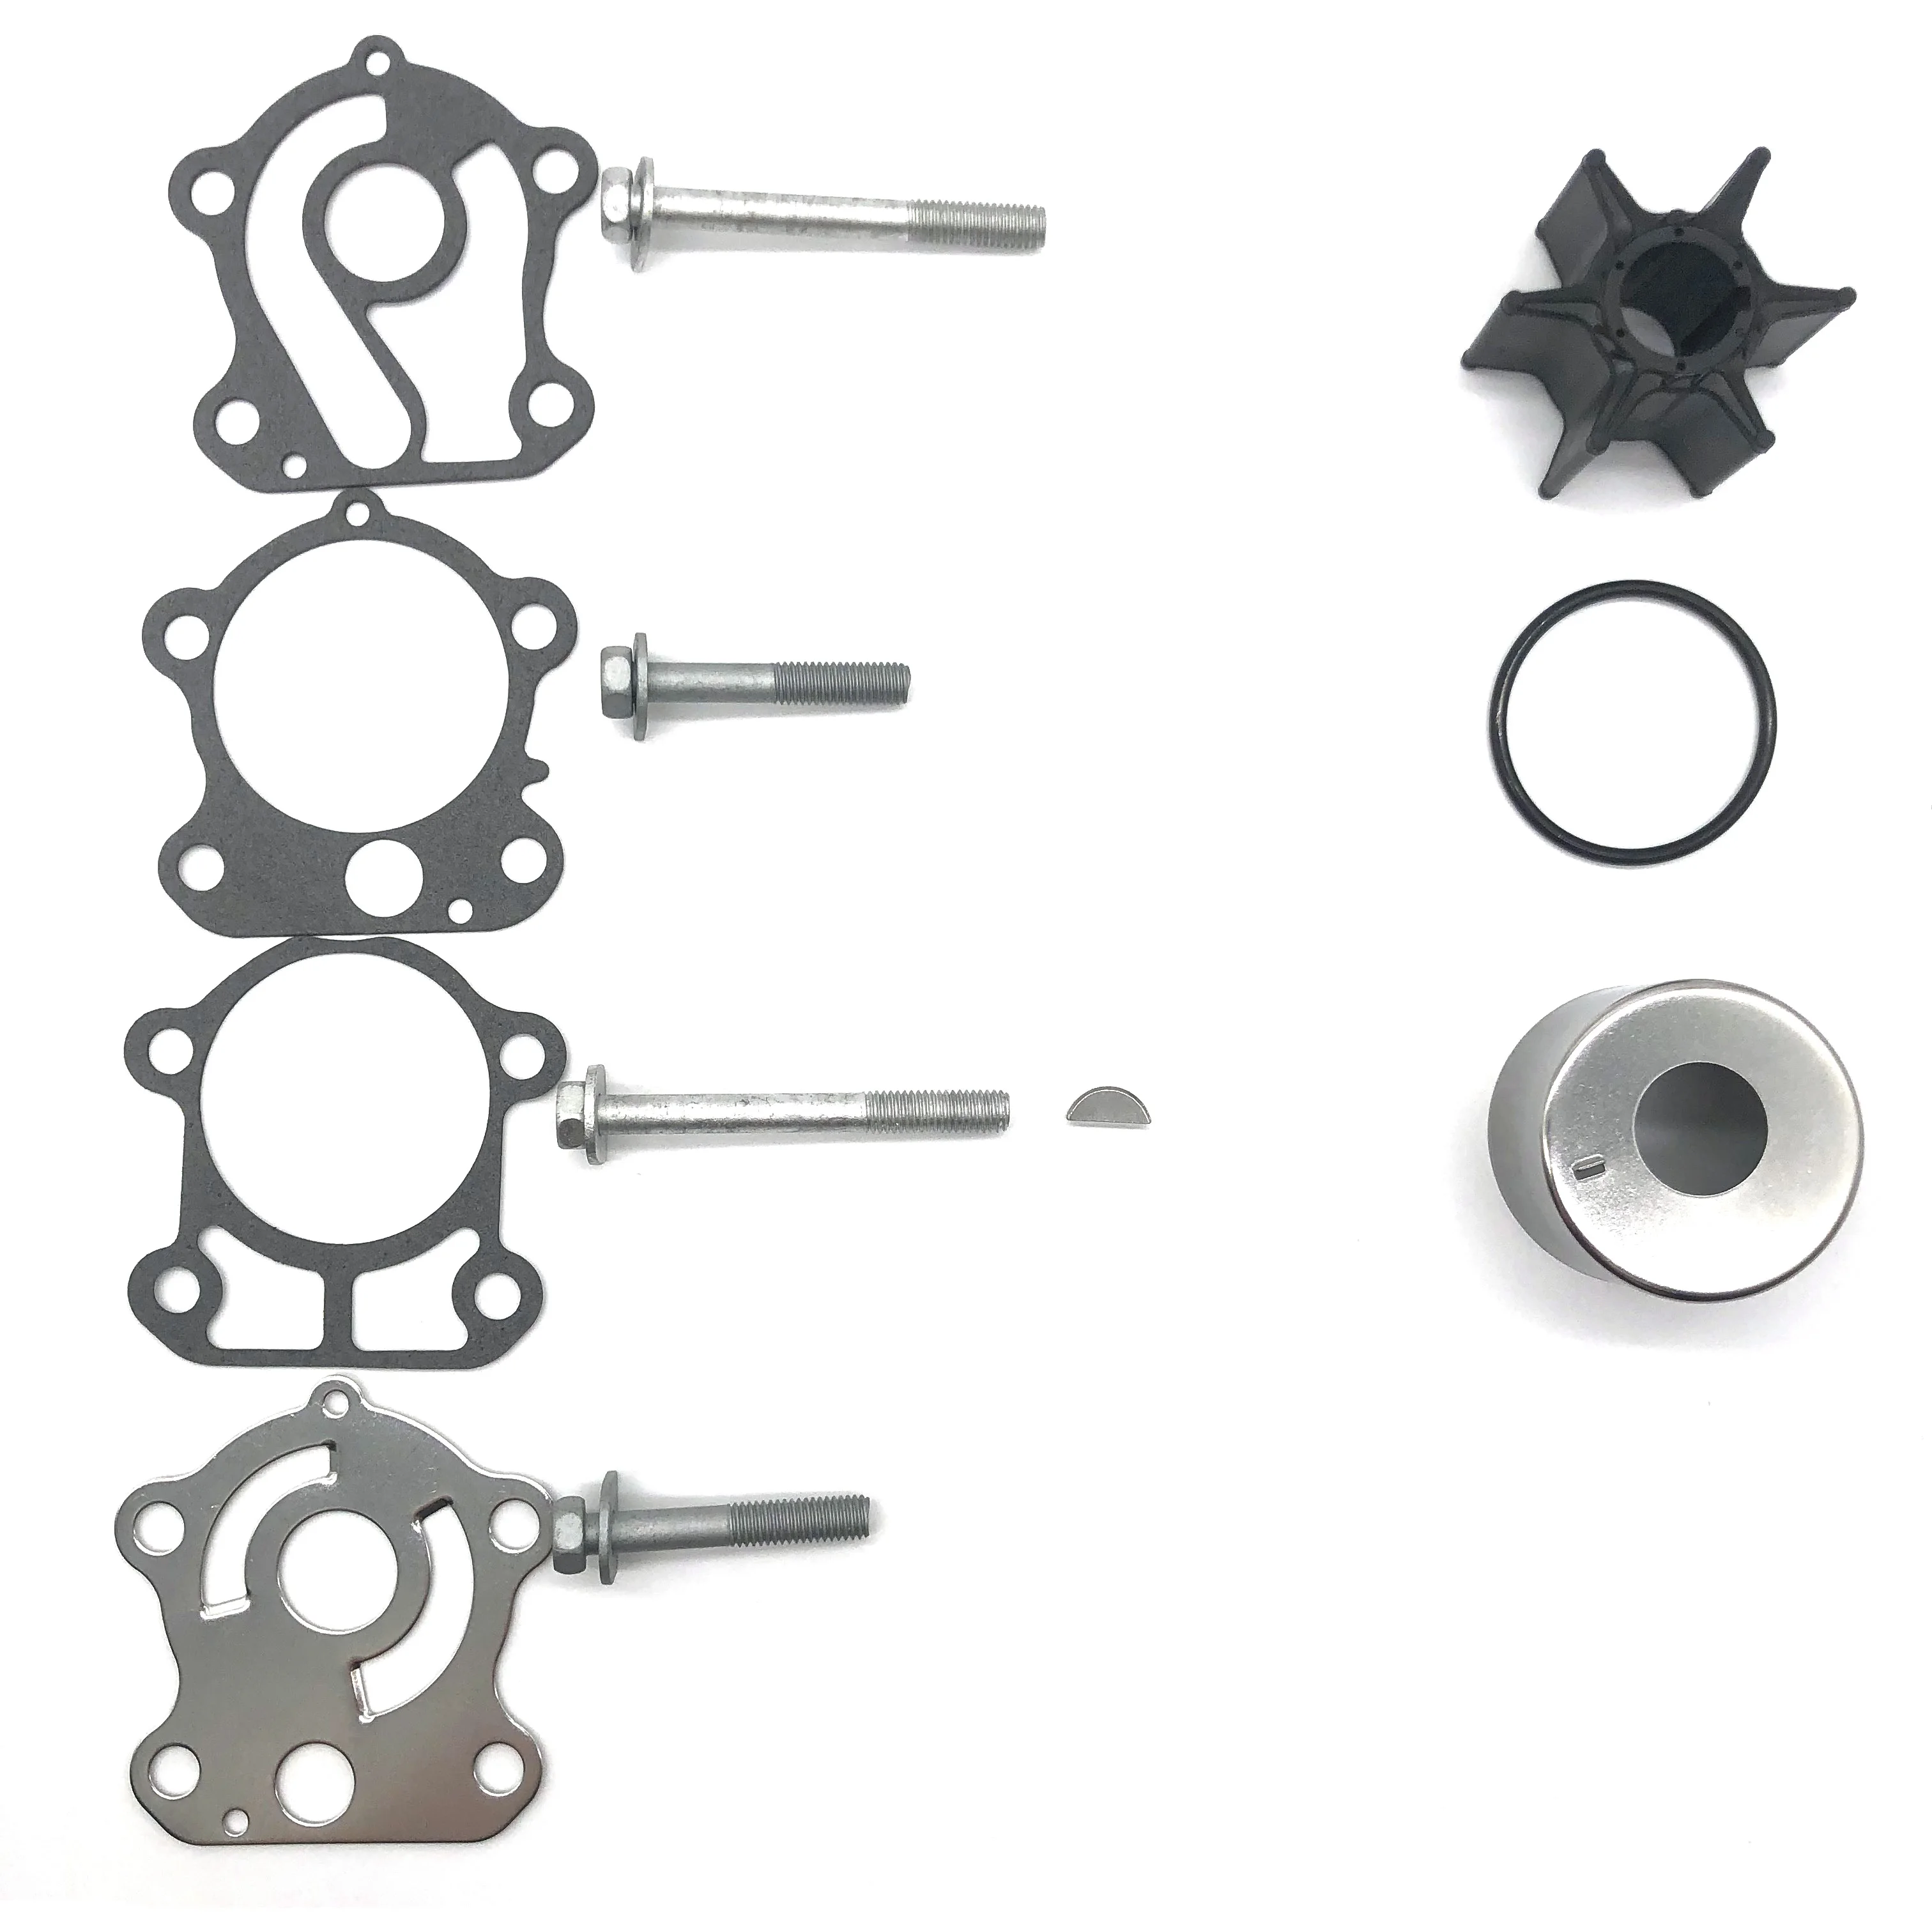 Water Pump Impeller Repair Kit for Yamaha Outboard  67F-W0078-00-00 /18-3451 75 hp (4-Stroke Model F75) 2003 - 2010